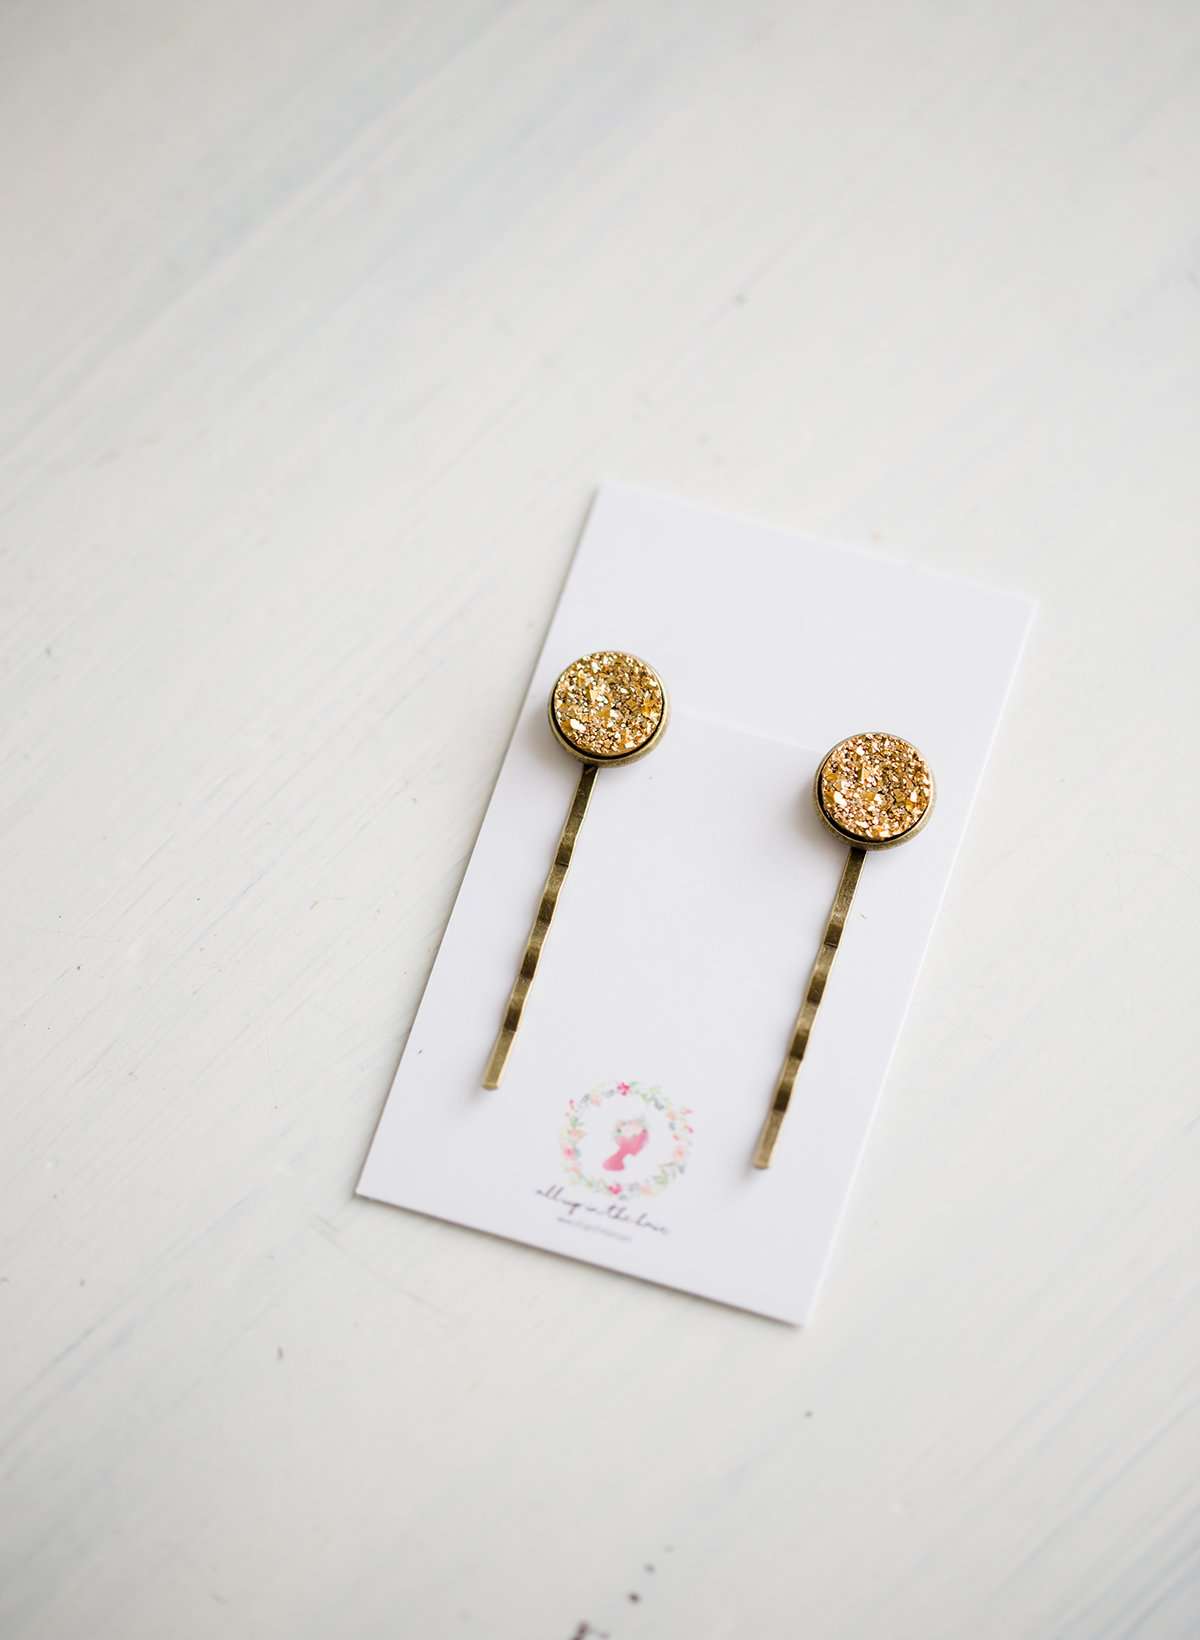 We love these unique, Gold Druzy Bobby Pins! These make a fun addition to your hair for small bursts of fun. You will find these make a great gift too!